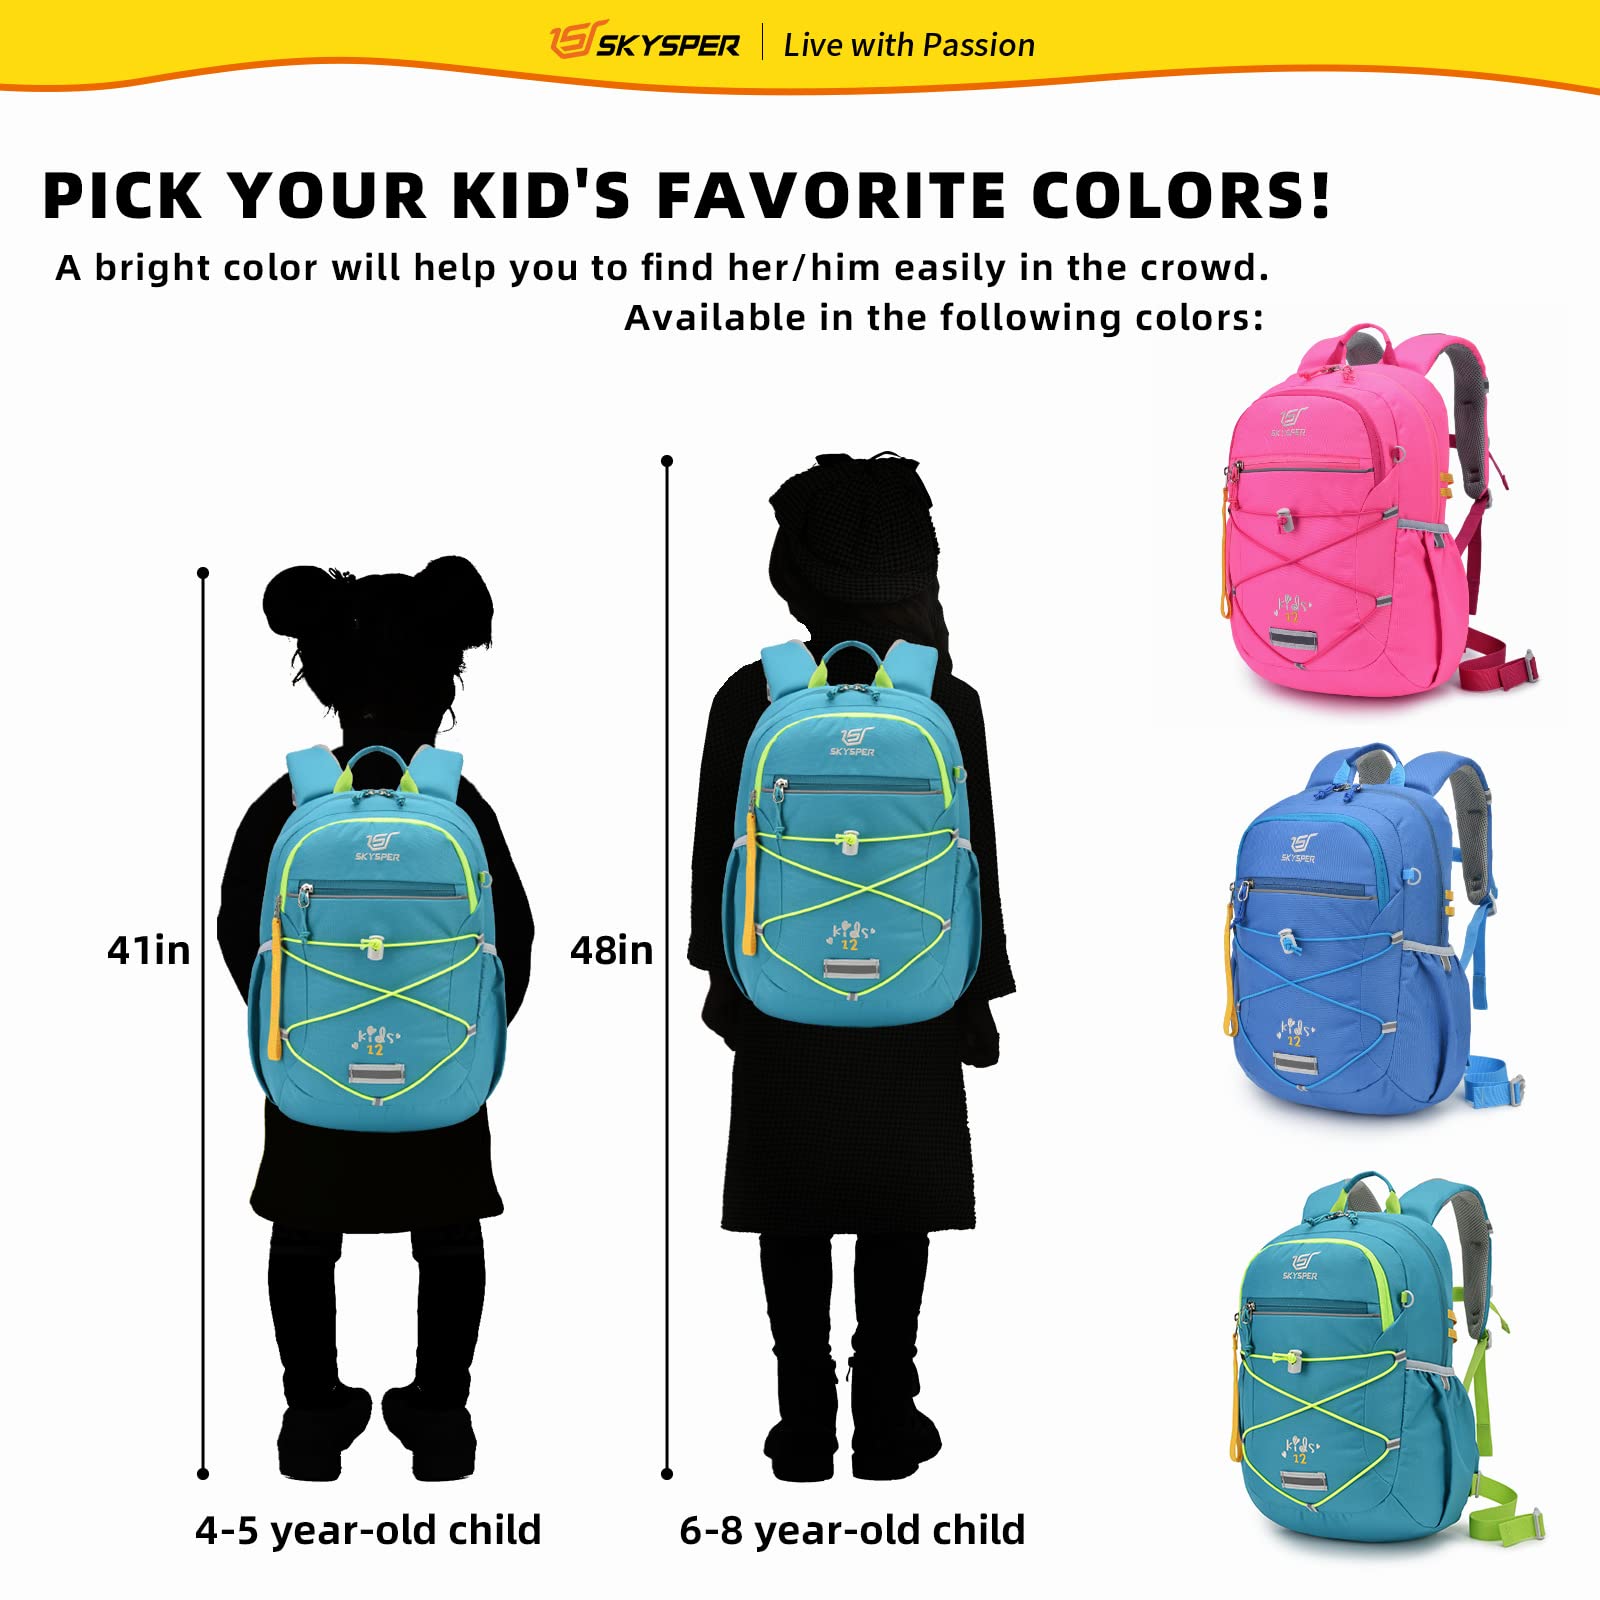 SKYSPER Kids Backpack 12L Children School Bag Child Boy Girl Outdoor Travel Pack Ages 4-8 for Day Trips Classes Camping(Teal)